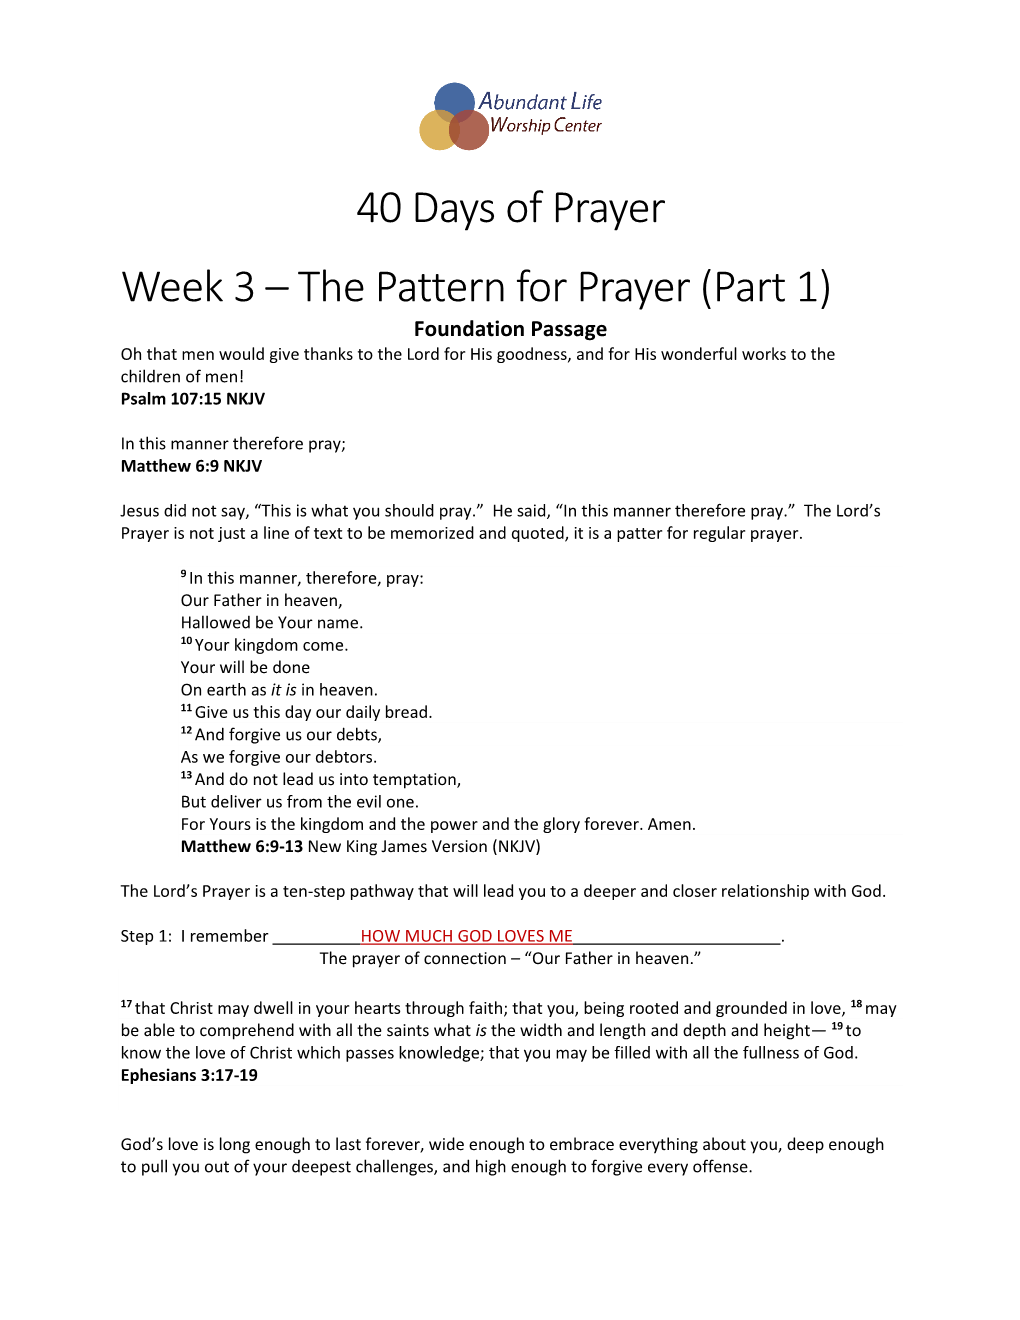 The Pattern for Prayer